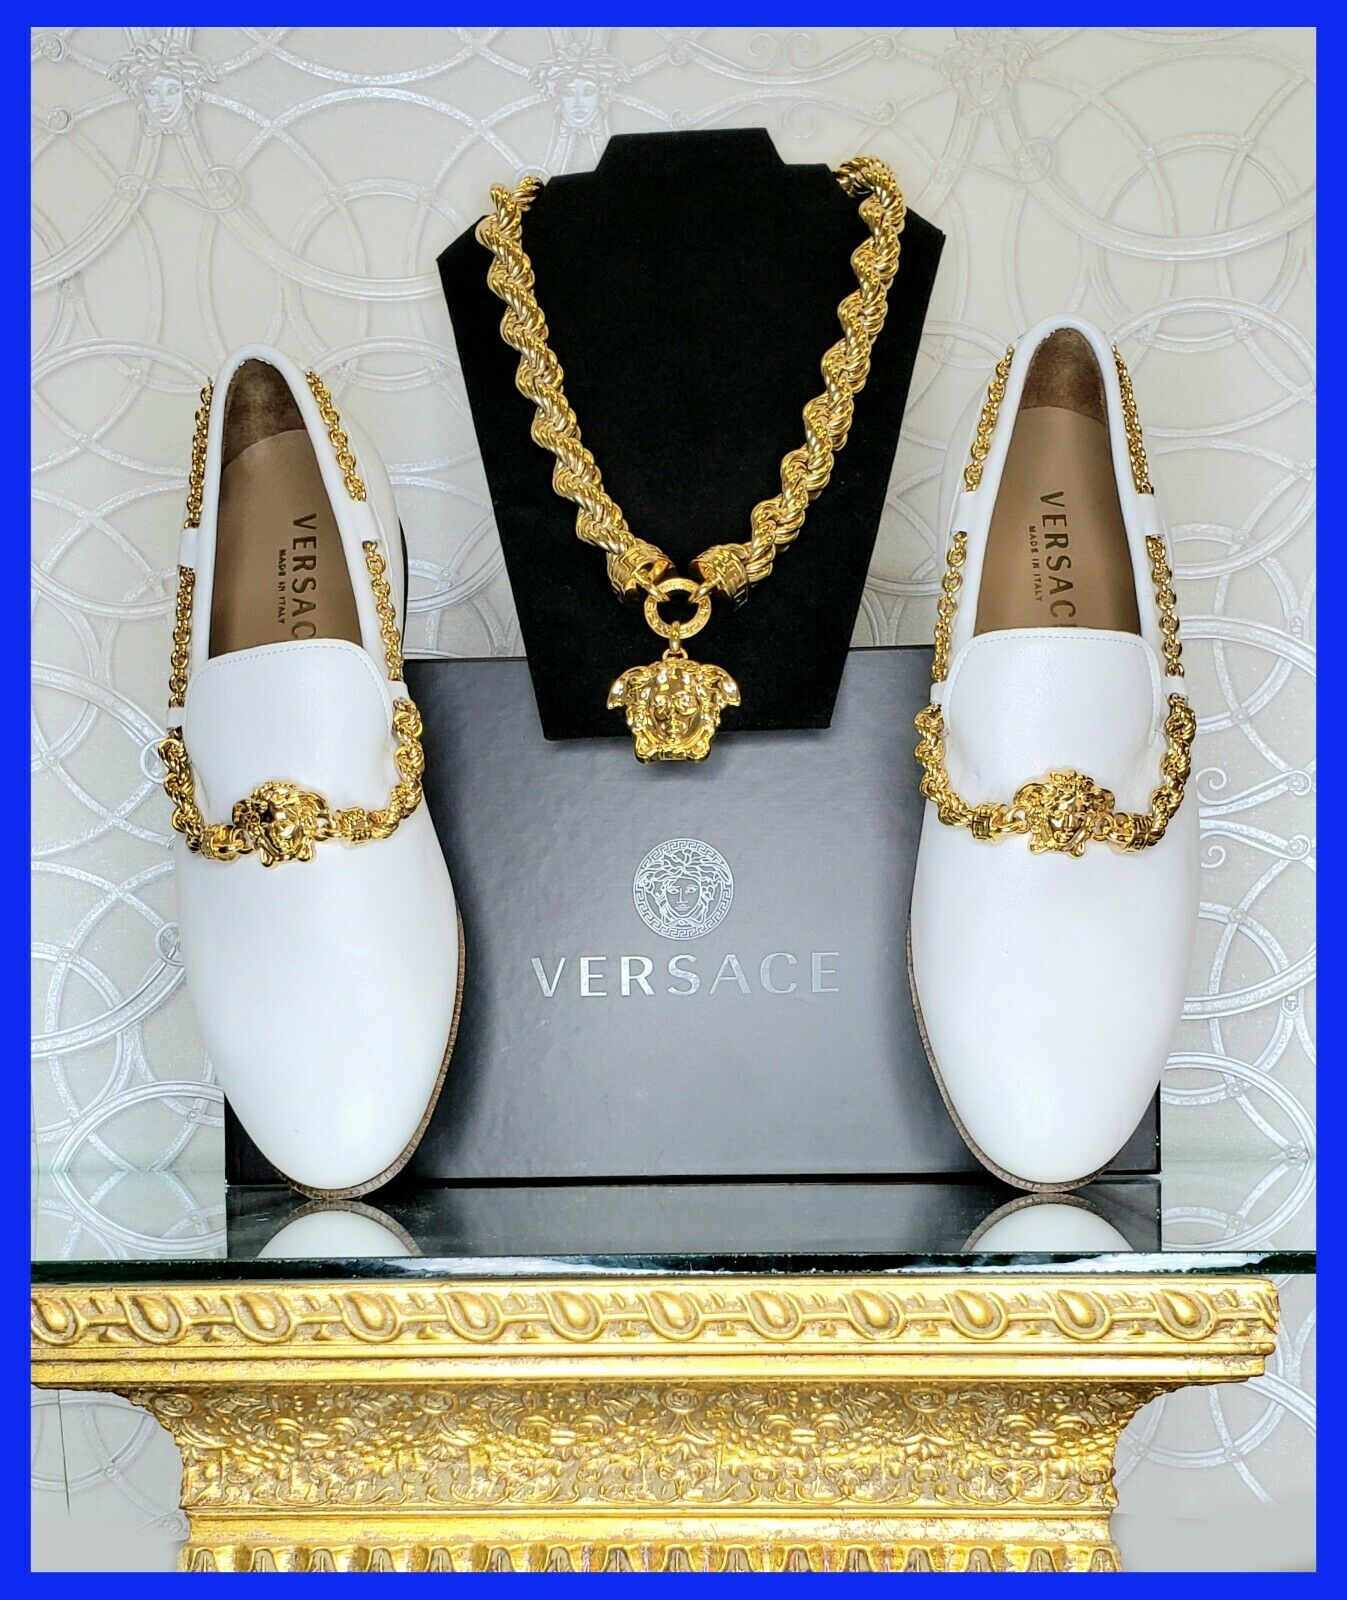 VERSACE WHITE LEATHER LOAFER SHOES and 24K GOLD PLATED MEDUSA NECKLACE SET